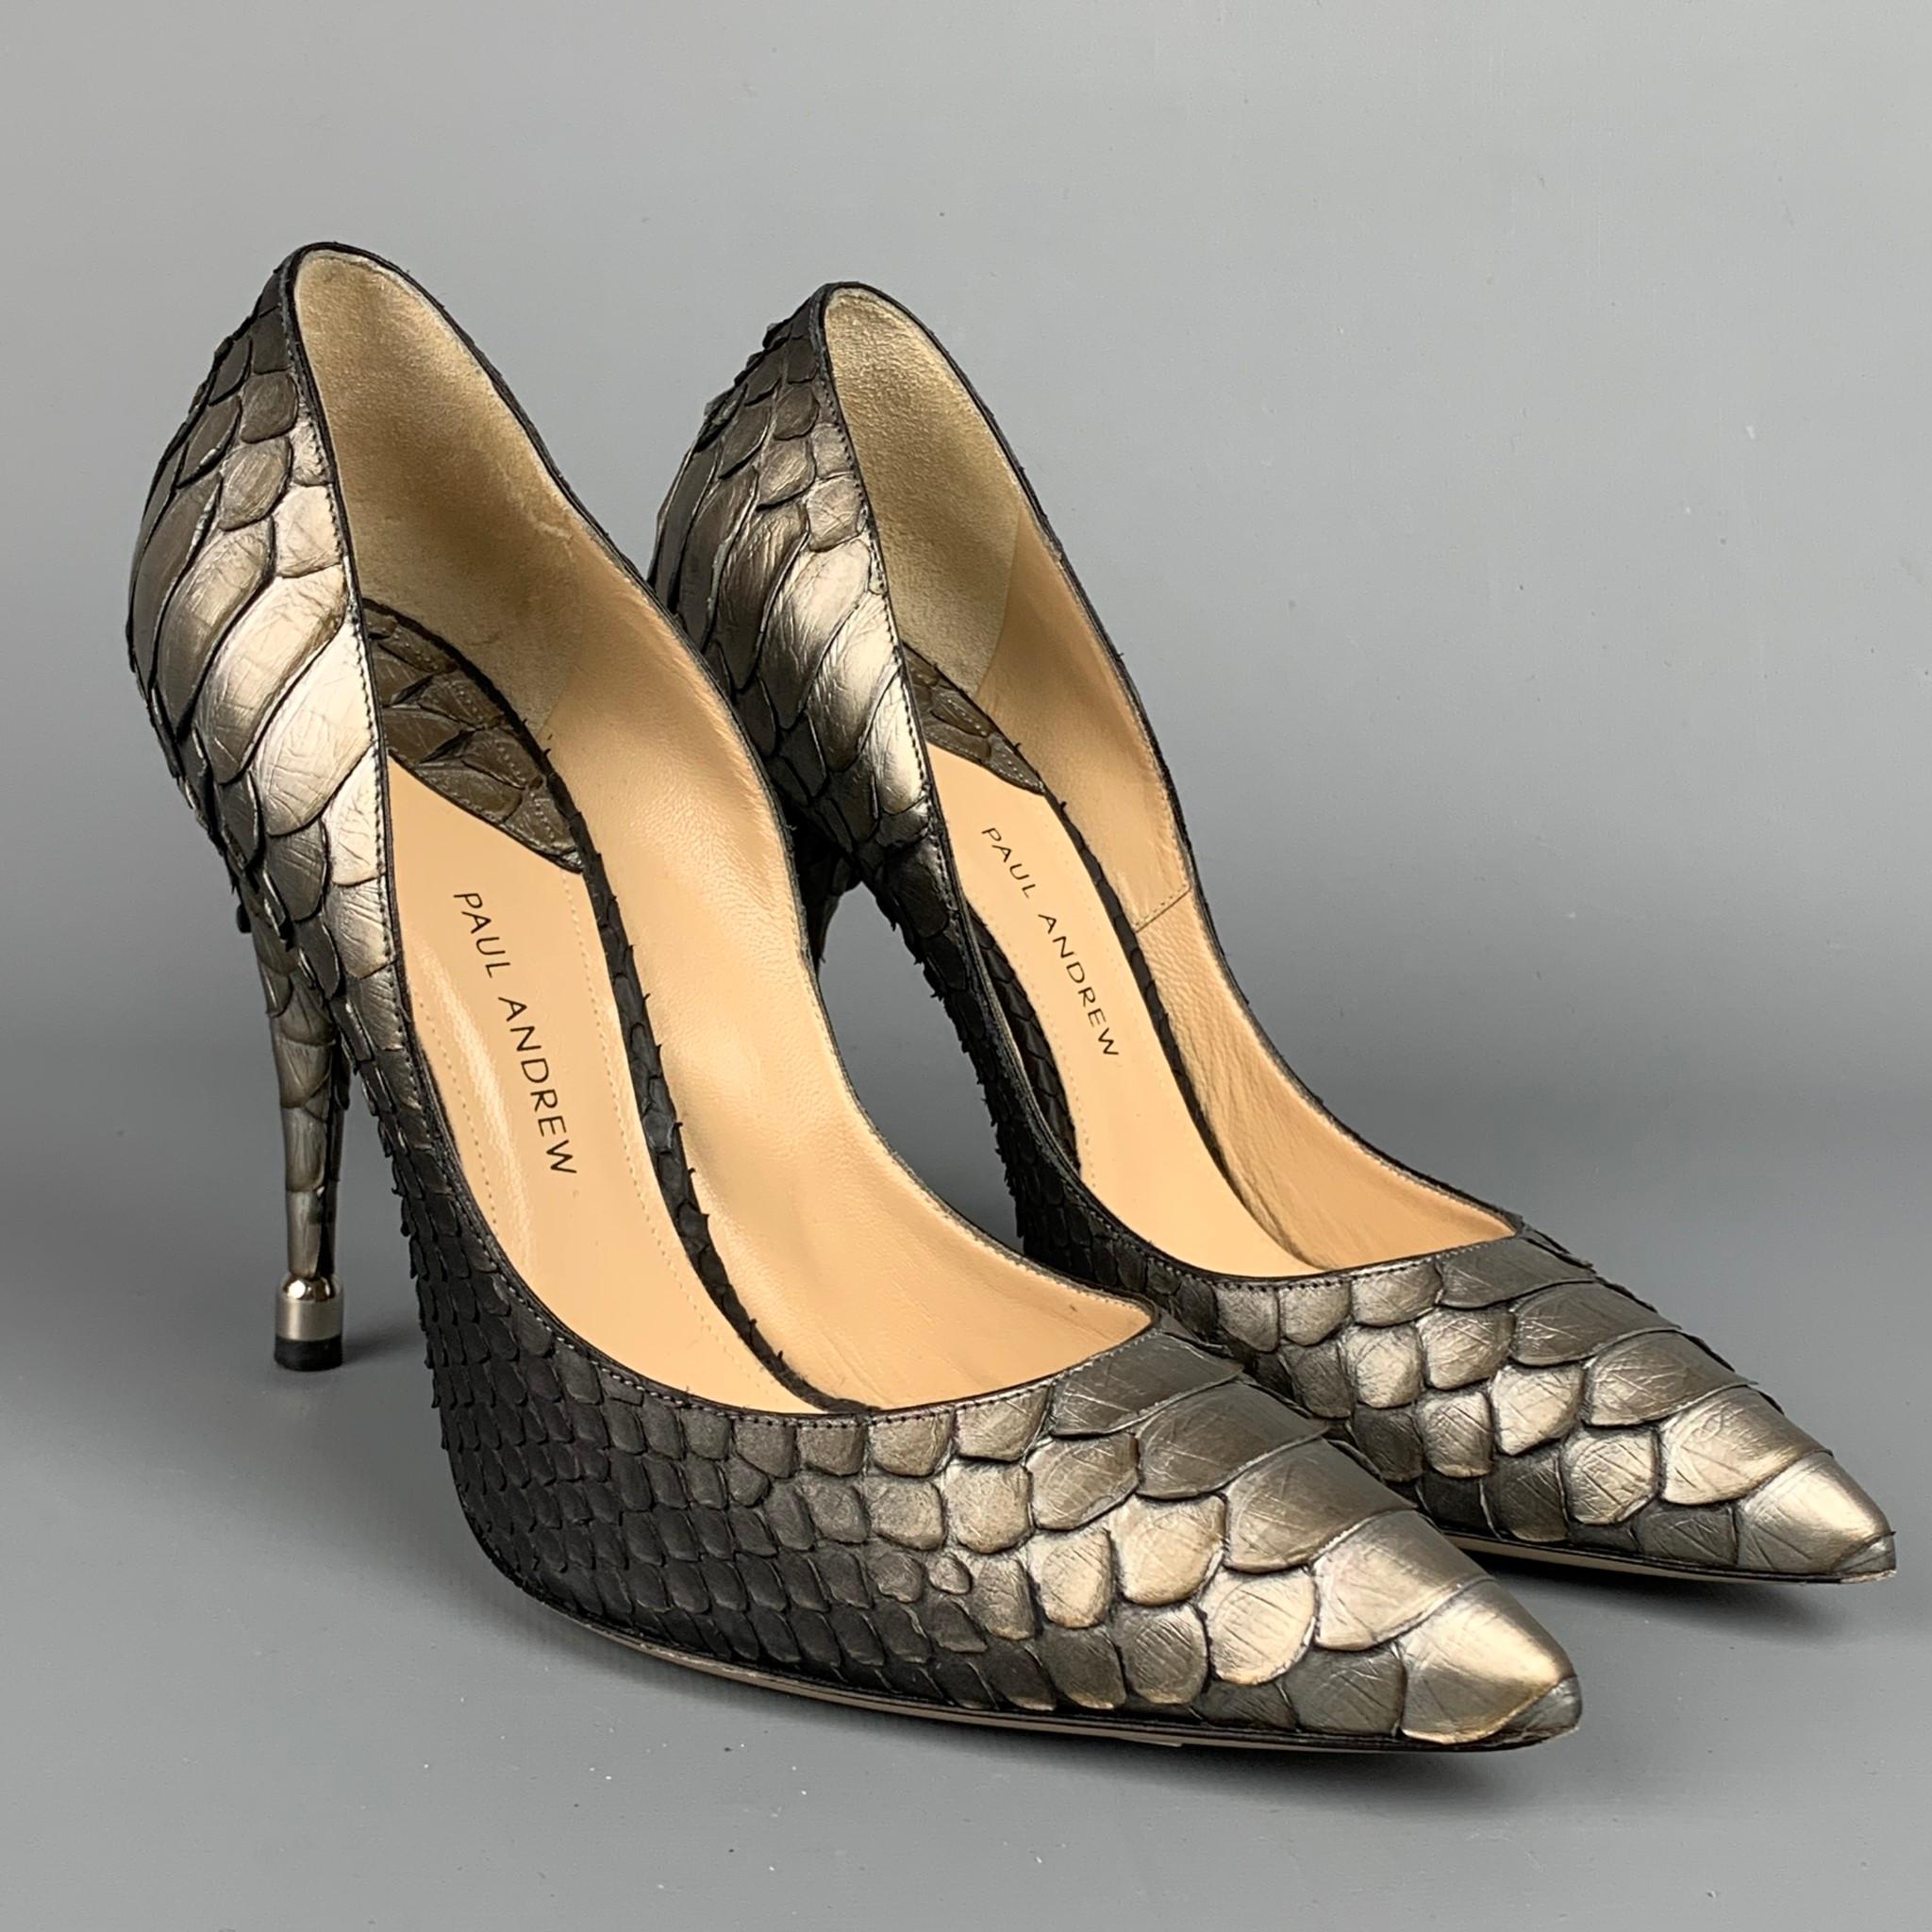 PAUL ANDREW pumps comes in a silver & grey ombre python skin featuring a pointed toe, silver tone hardware, and a stacked heel. Made in Italy.

Very Good Pre-Owned Condition.
Marked: IT 38

Measurements:

Heel: 4.5 in. 